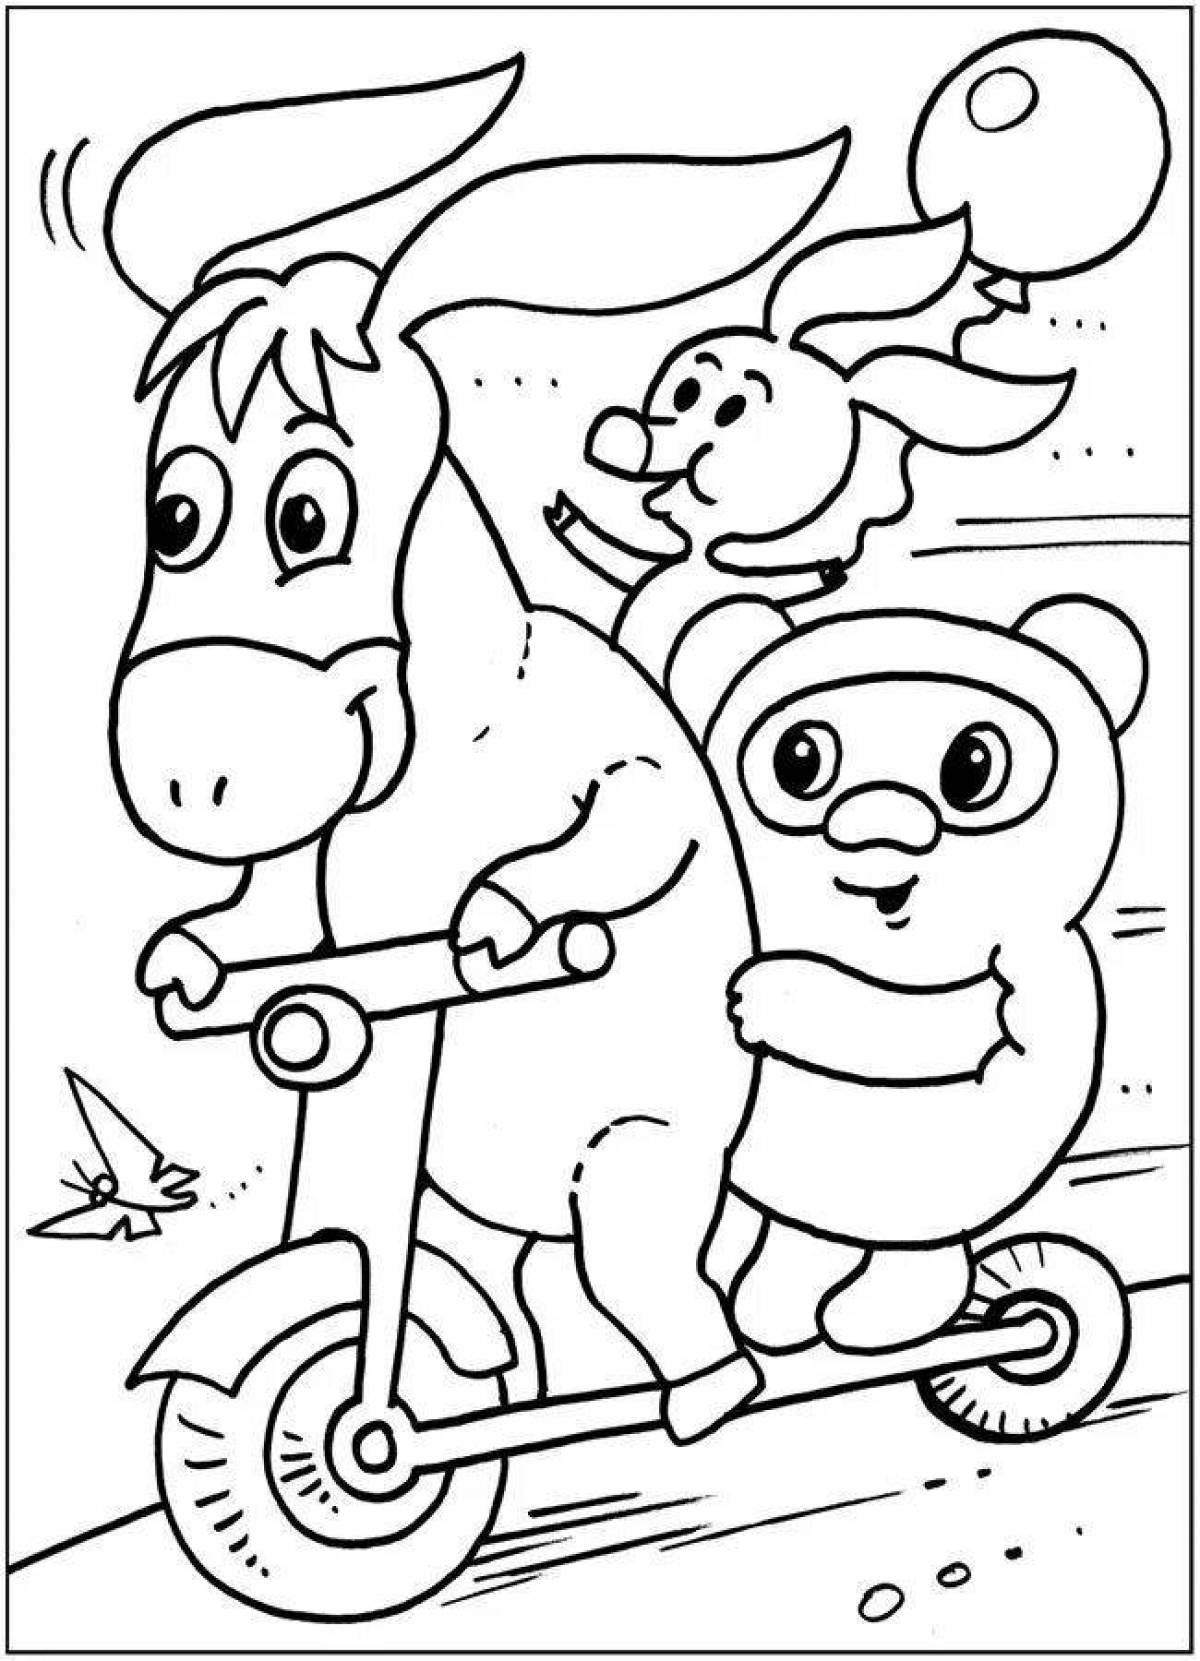 Attractive cartoon coloring book for 5-6 year olds